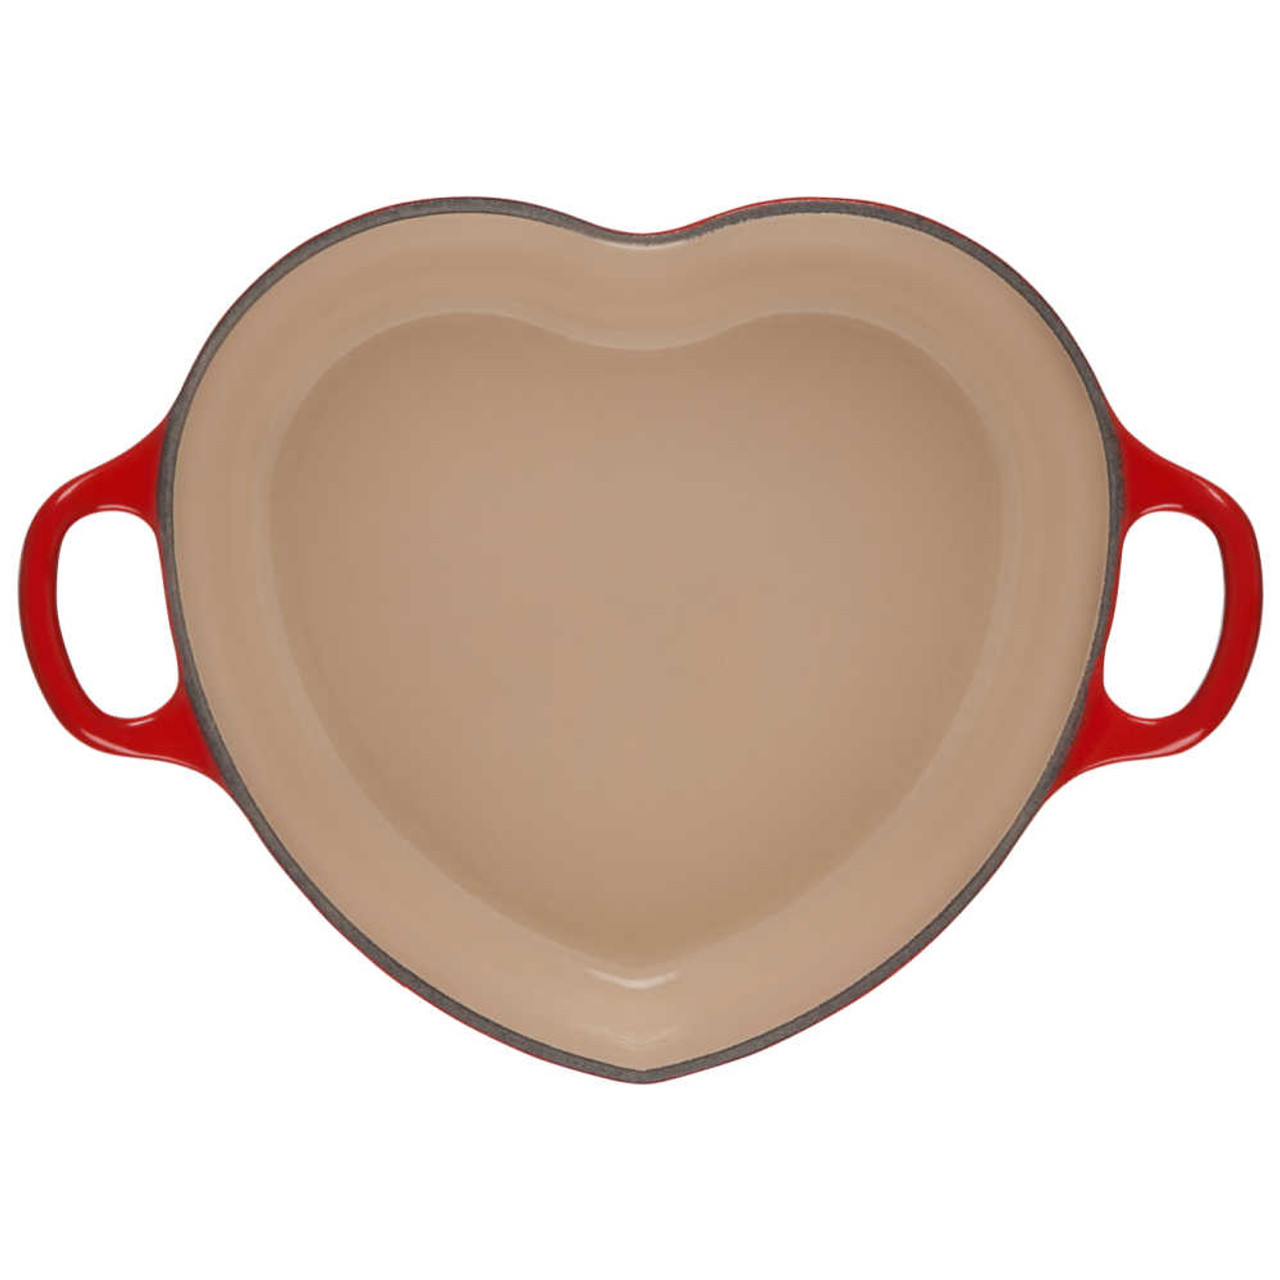 https://cdn11.bigcommerce.com/s-hccytny0od/images/stencil/1280x1280/products/3847/17472/Le_Creuset_Heart_Cocotte_Cerise_2__56792.1639439110.jpg?c=2?imbypass=on